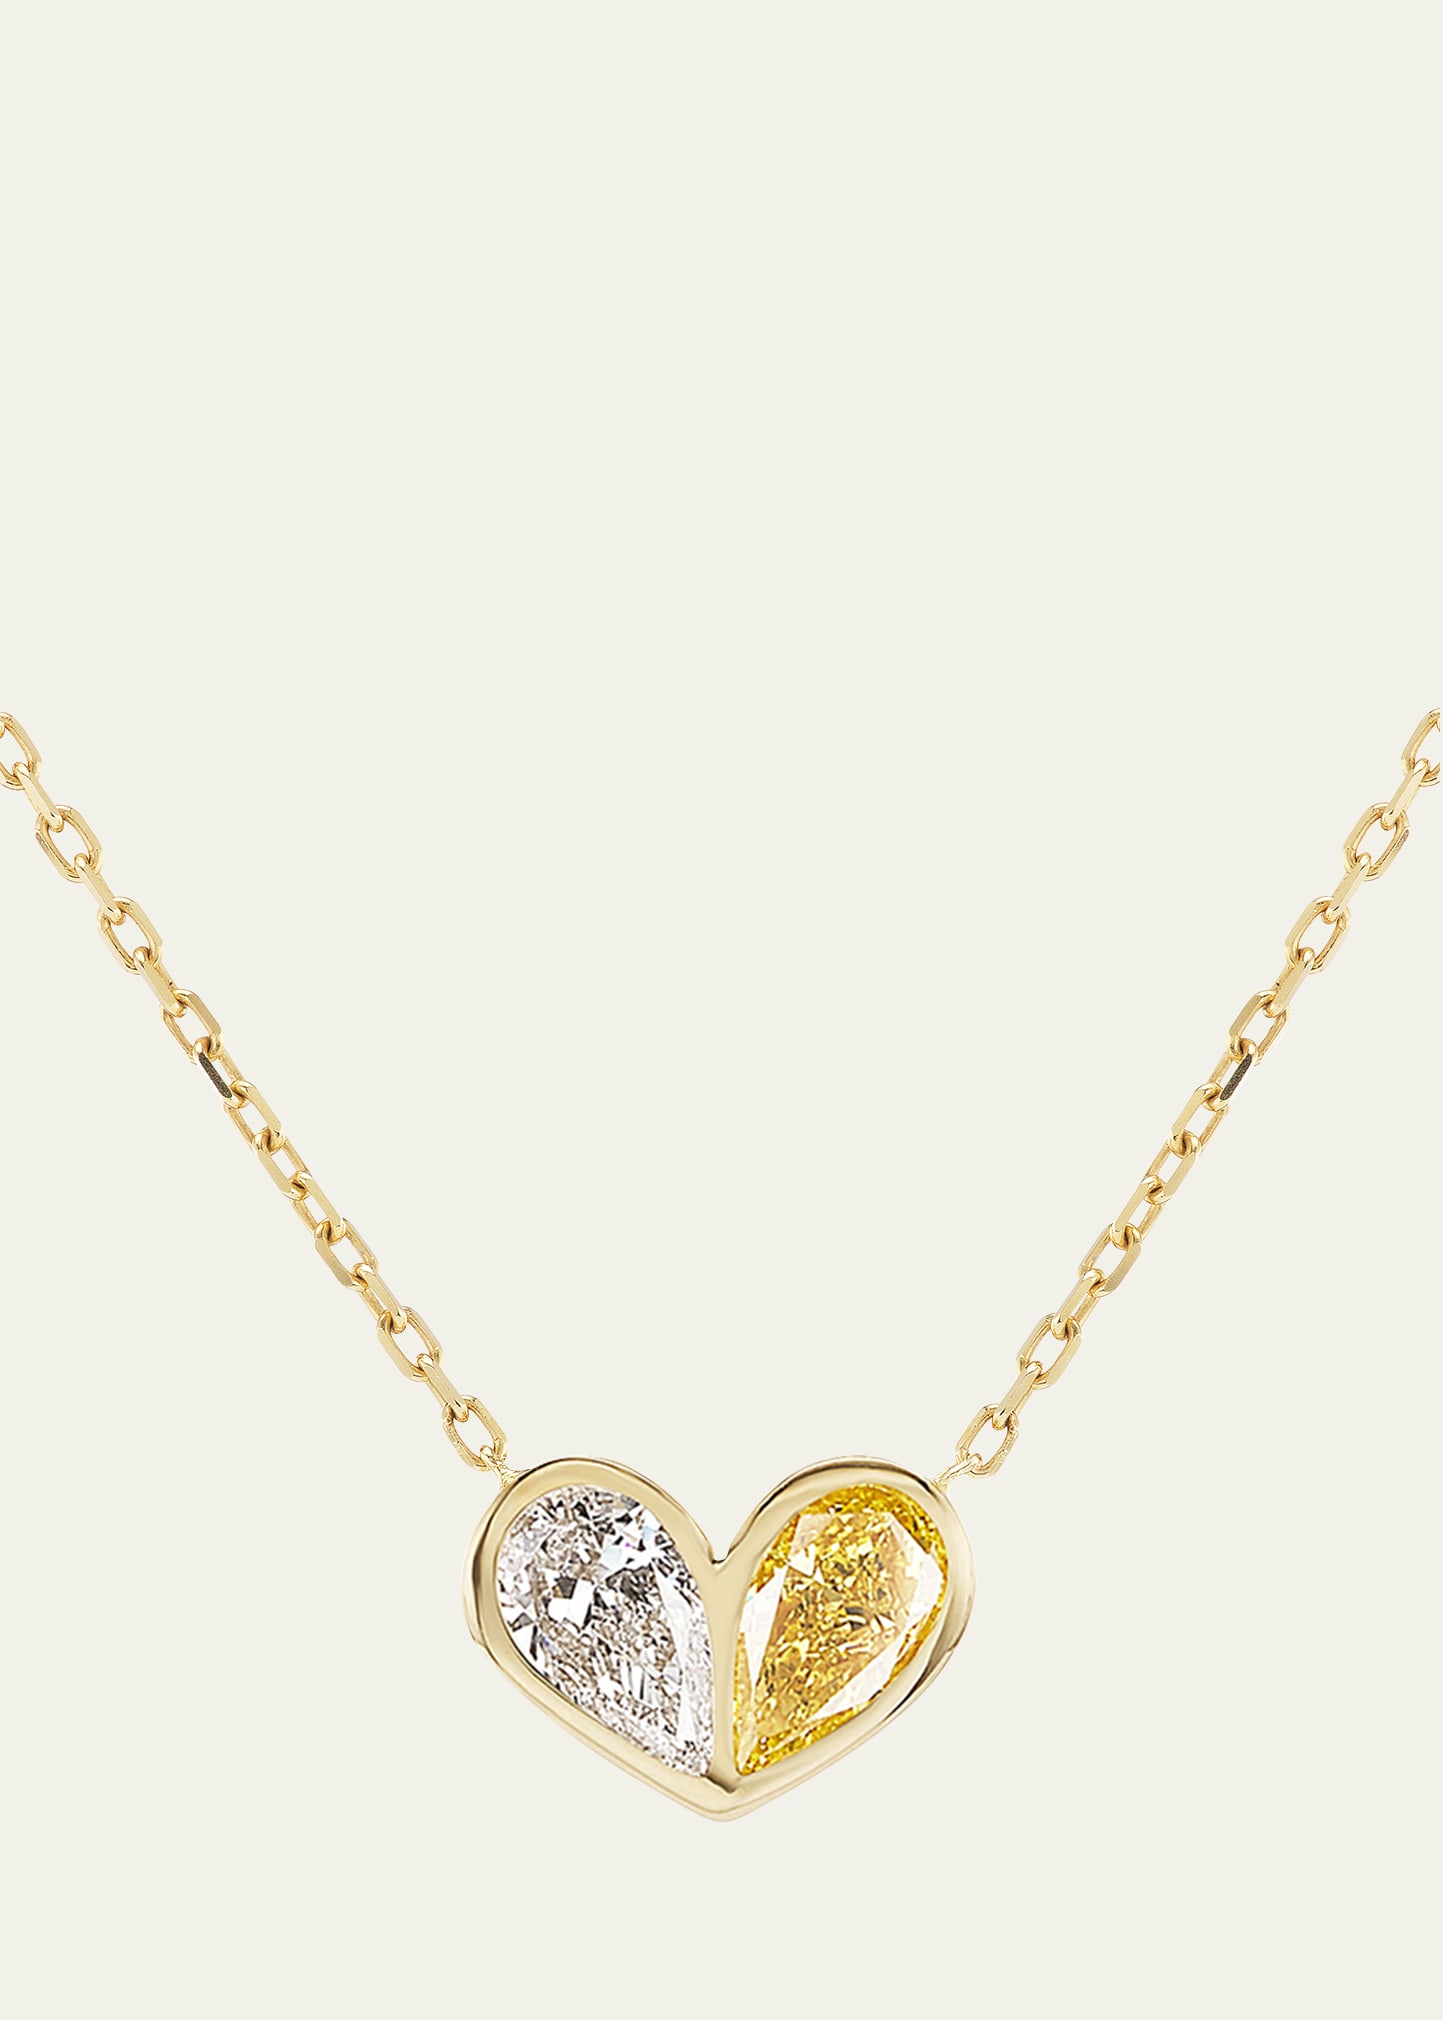 Yellow Gold Sweetheart Necklace with Yellow and White Diamonds